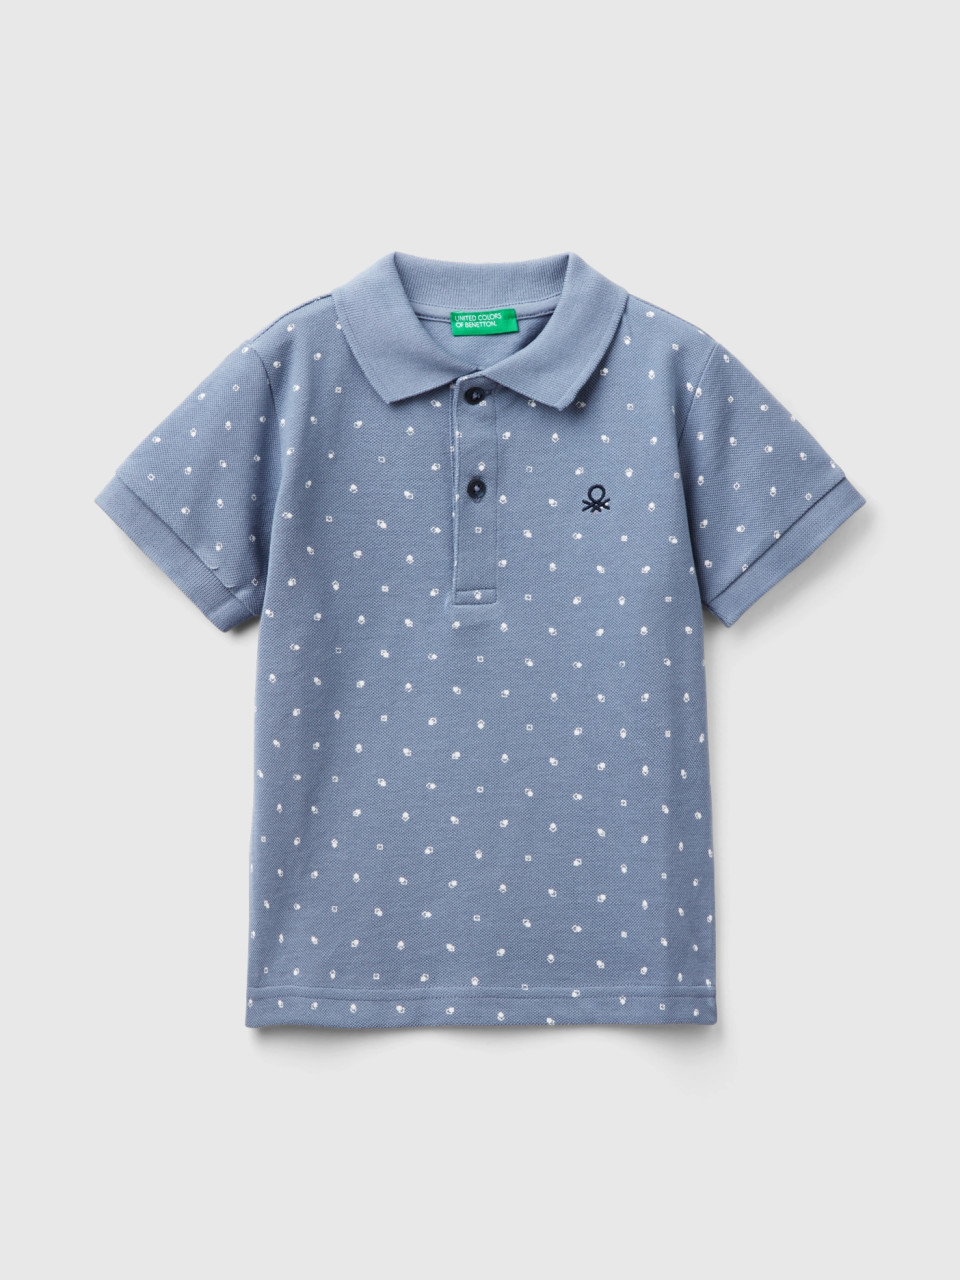 Benetton, Slim Fit Micro Patterned Polo, Gray, Kids